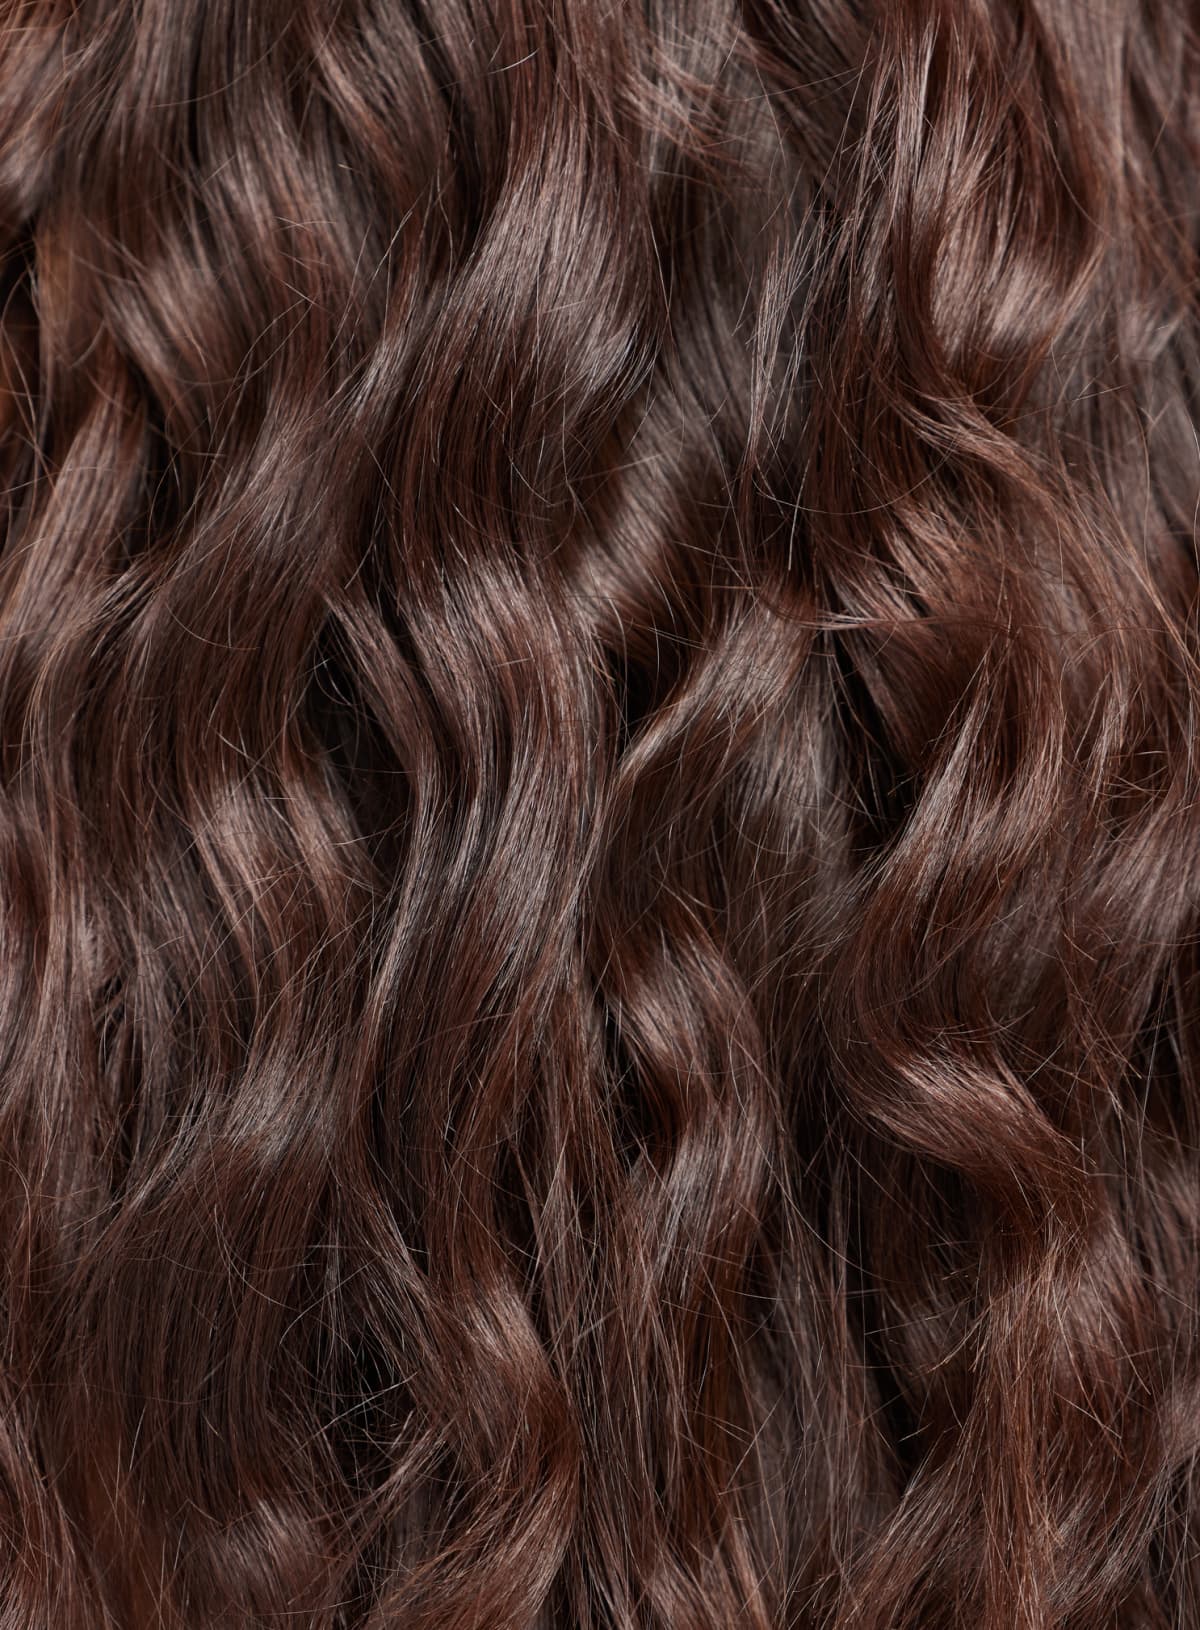 A close up of long dark hair with loose curls